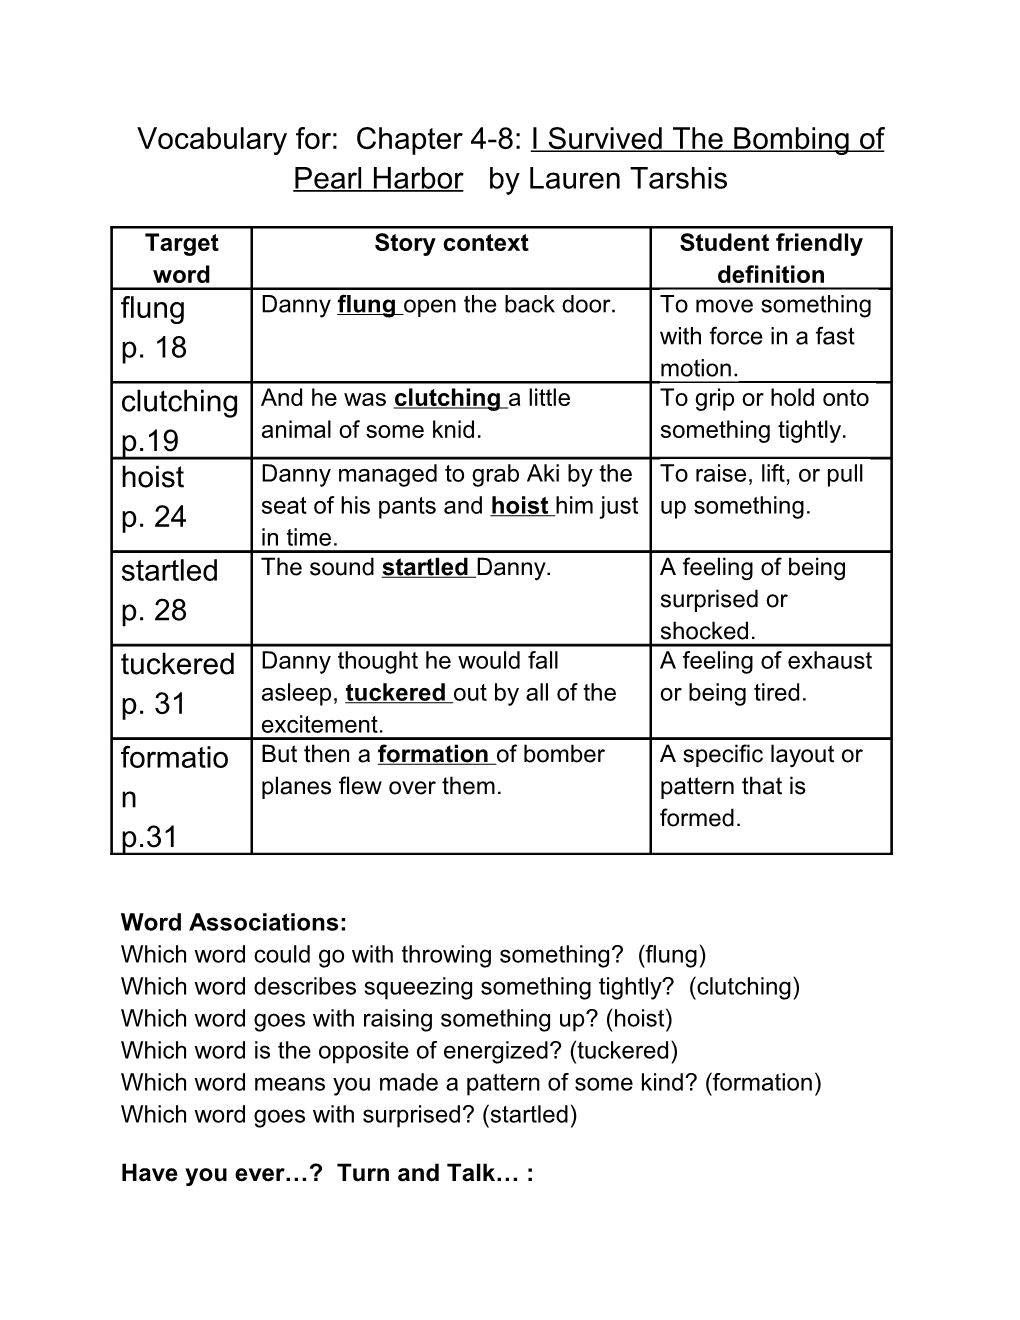 Vocabulary For: Chapter 4-8: I Survived the Bombing of Pearl Harbor by Lauren Tarshis